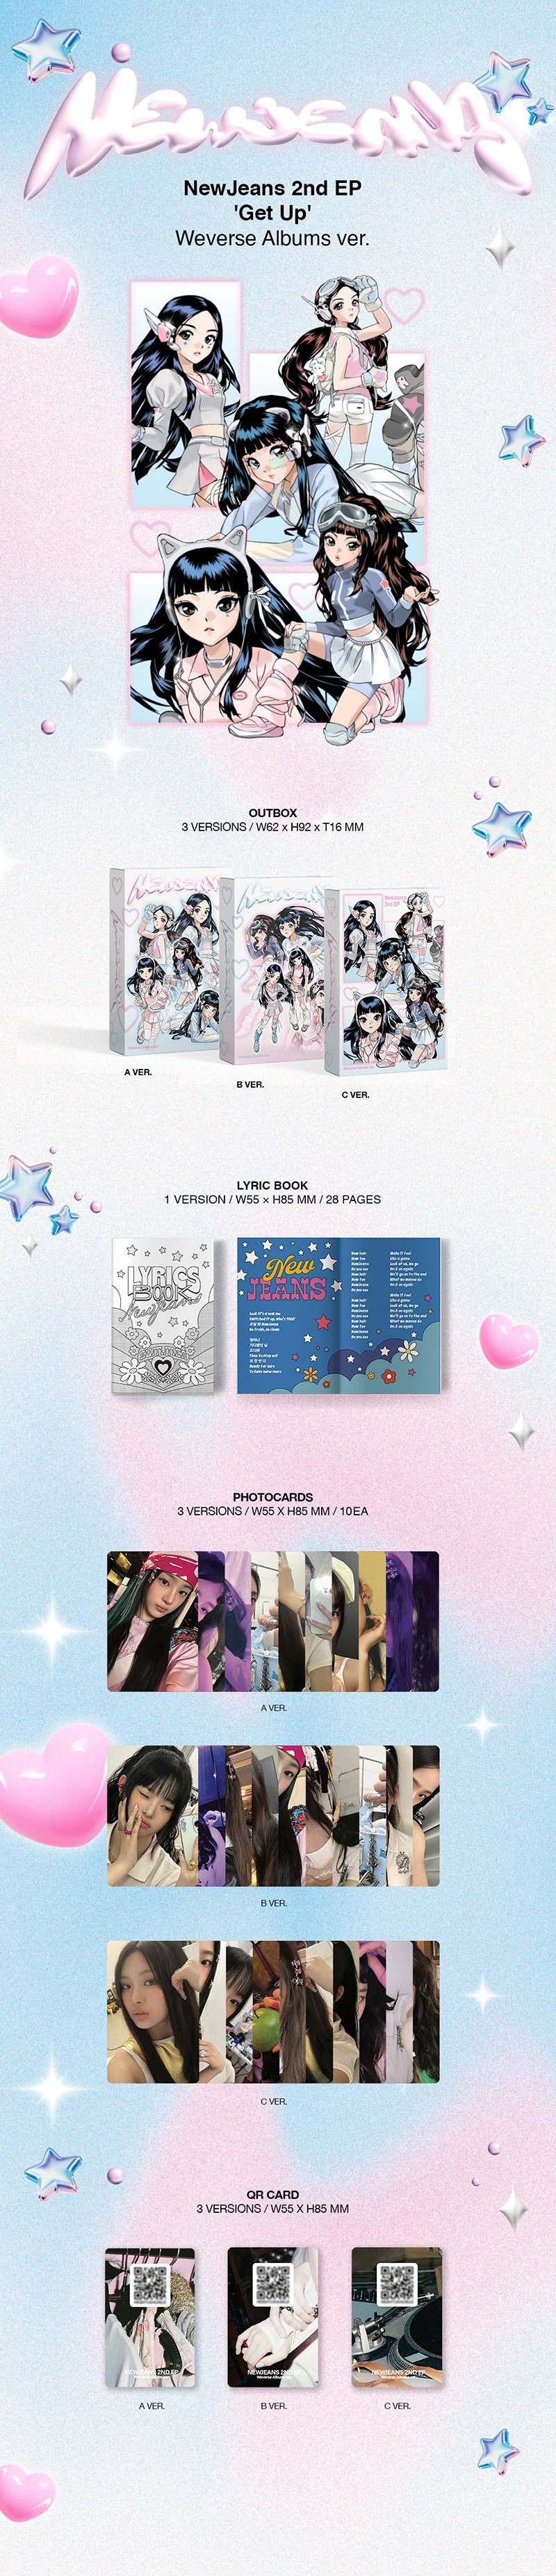 NewJeans 'Get Up' (Weverse Albums ver.) Pre-order